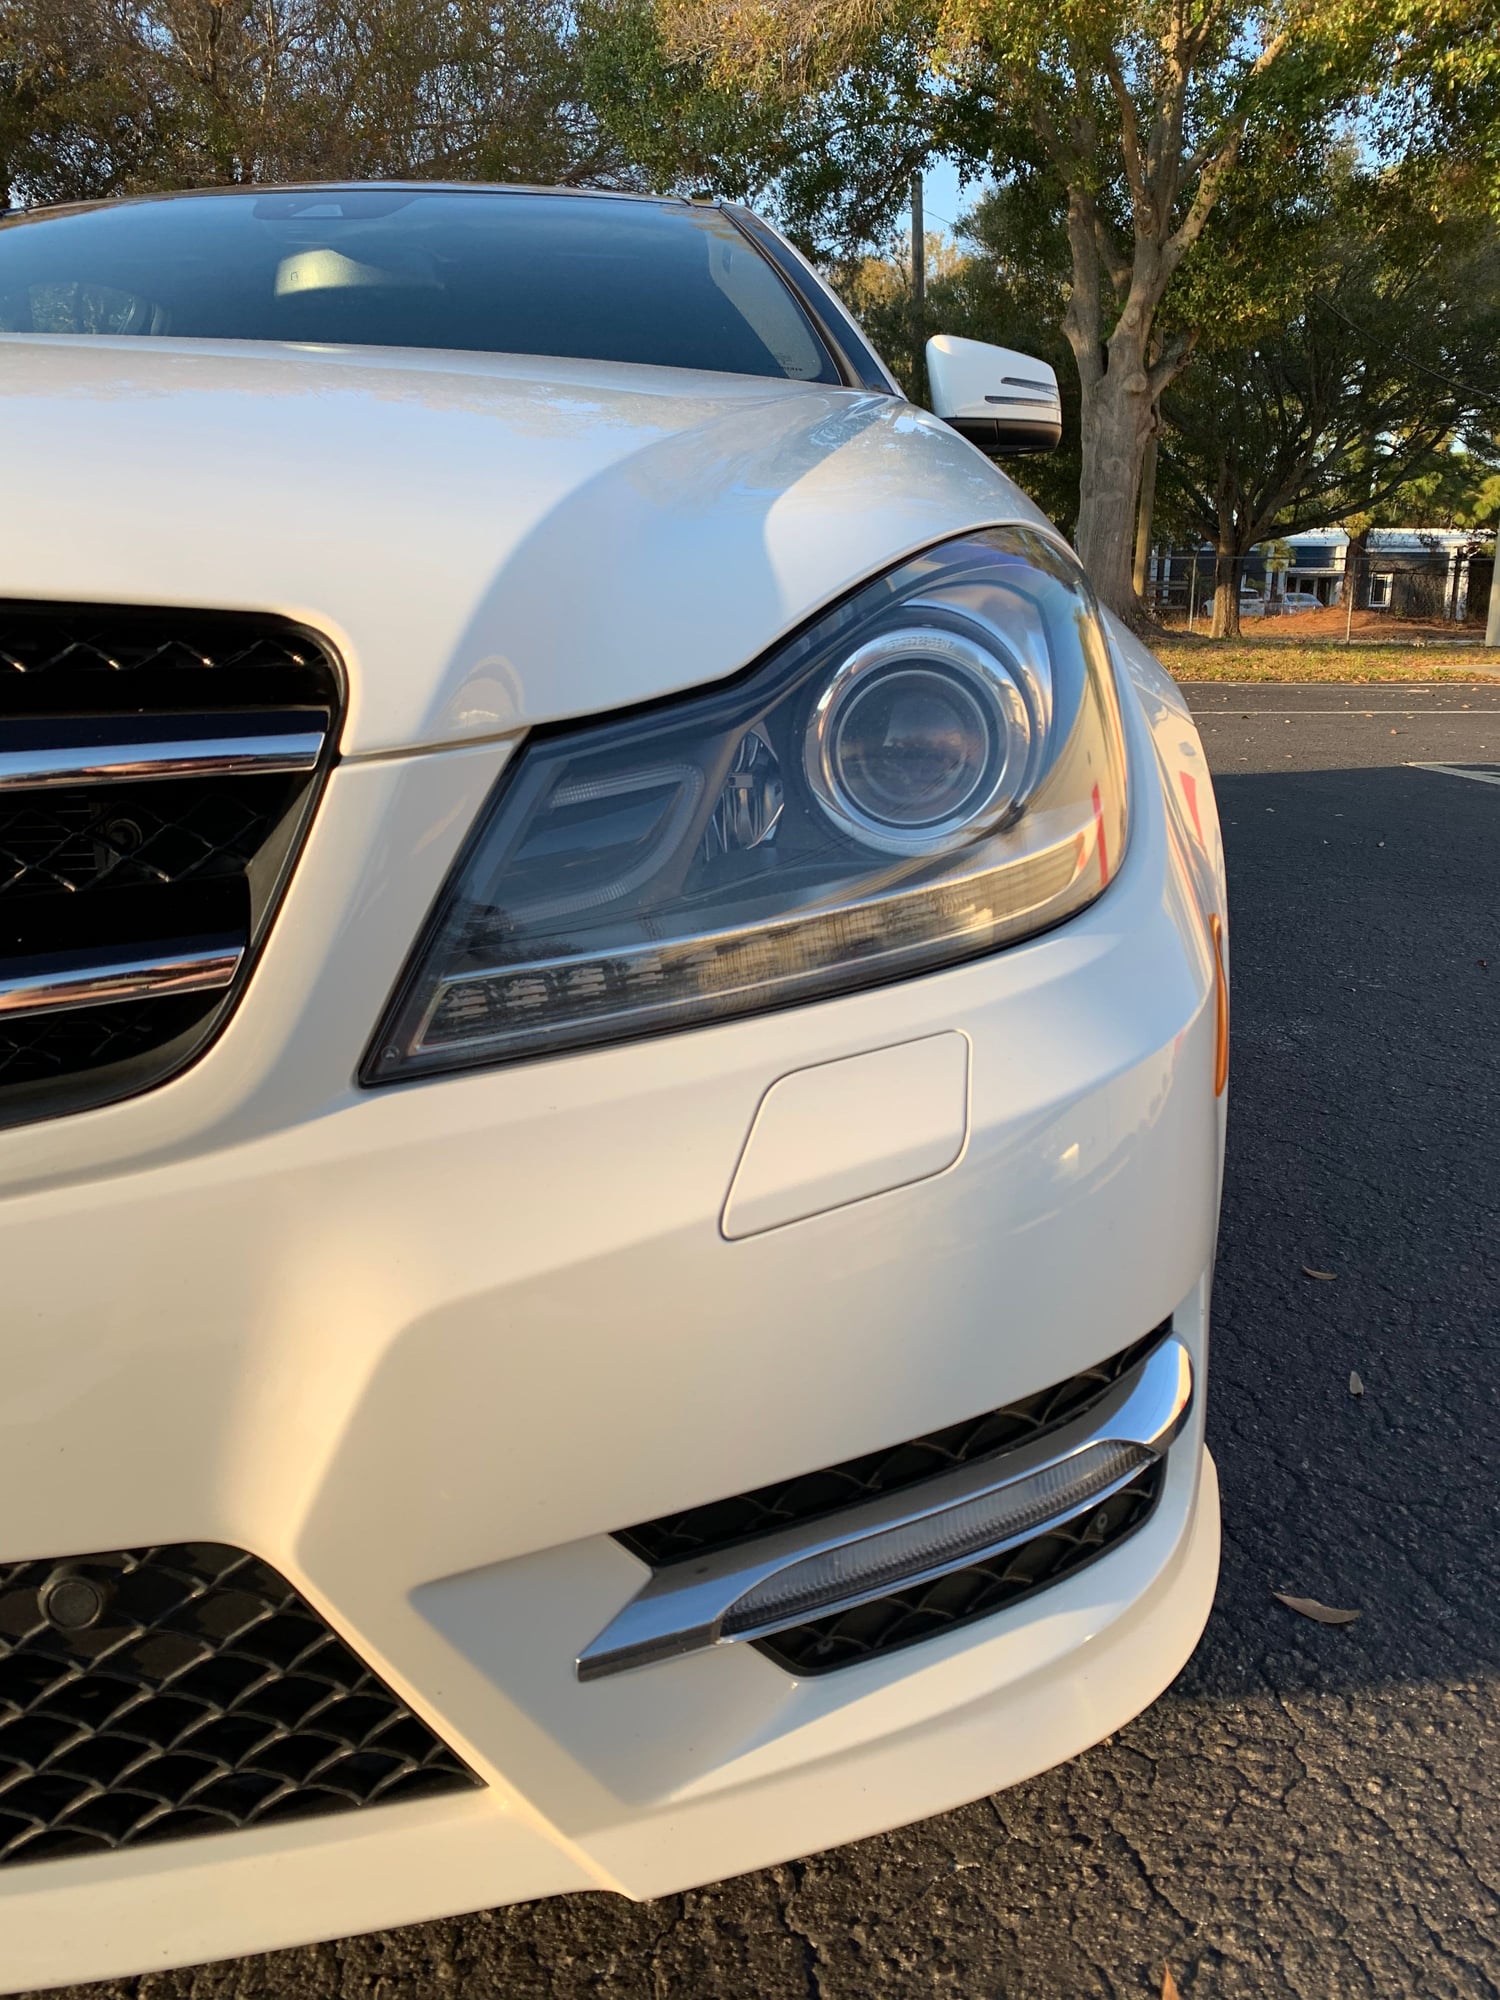 2013 Mercedes-Benz C350 - 2013 C350 Coupe 4Matic - 1 Owner - Showroom condition - Used - VIN WDDGJ8JB3DG063865 - 46,300 Miles - 6 cyl - AWD - Automatic - Coupe - White - St Petersburg, FL 33710, United States